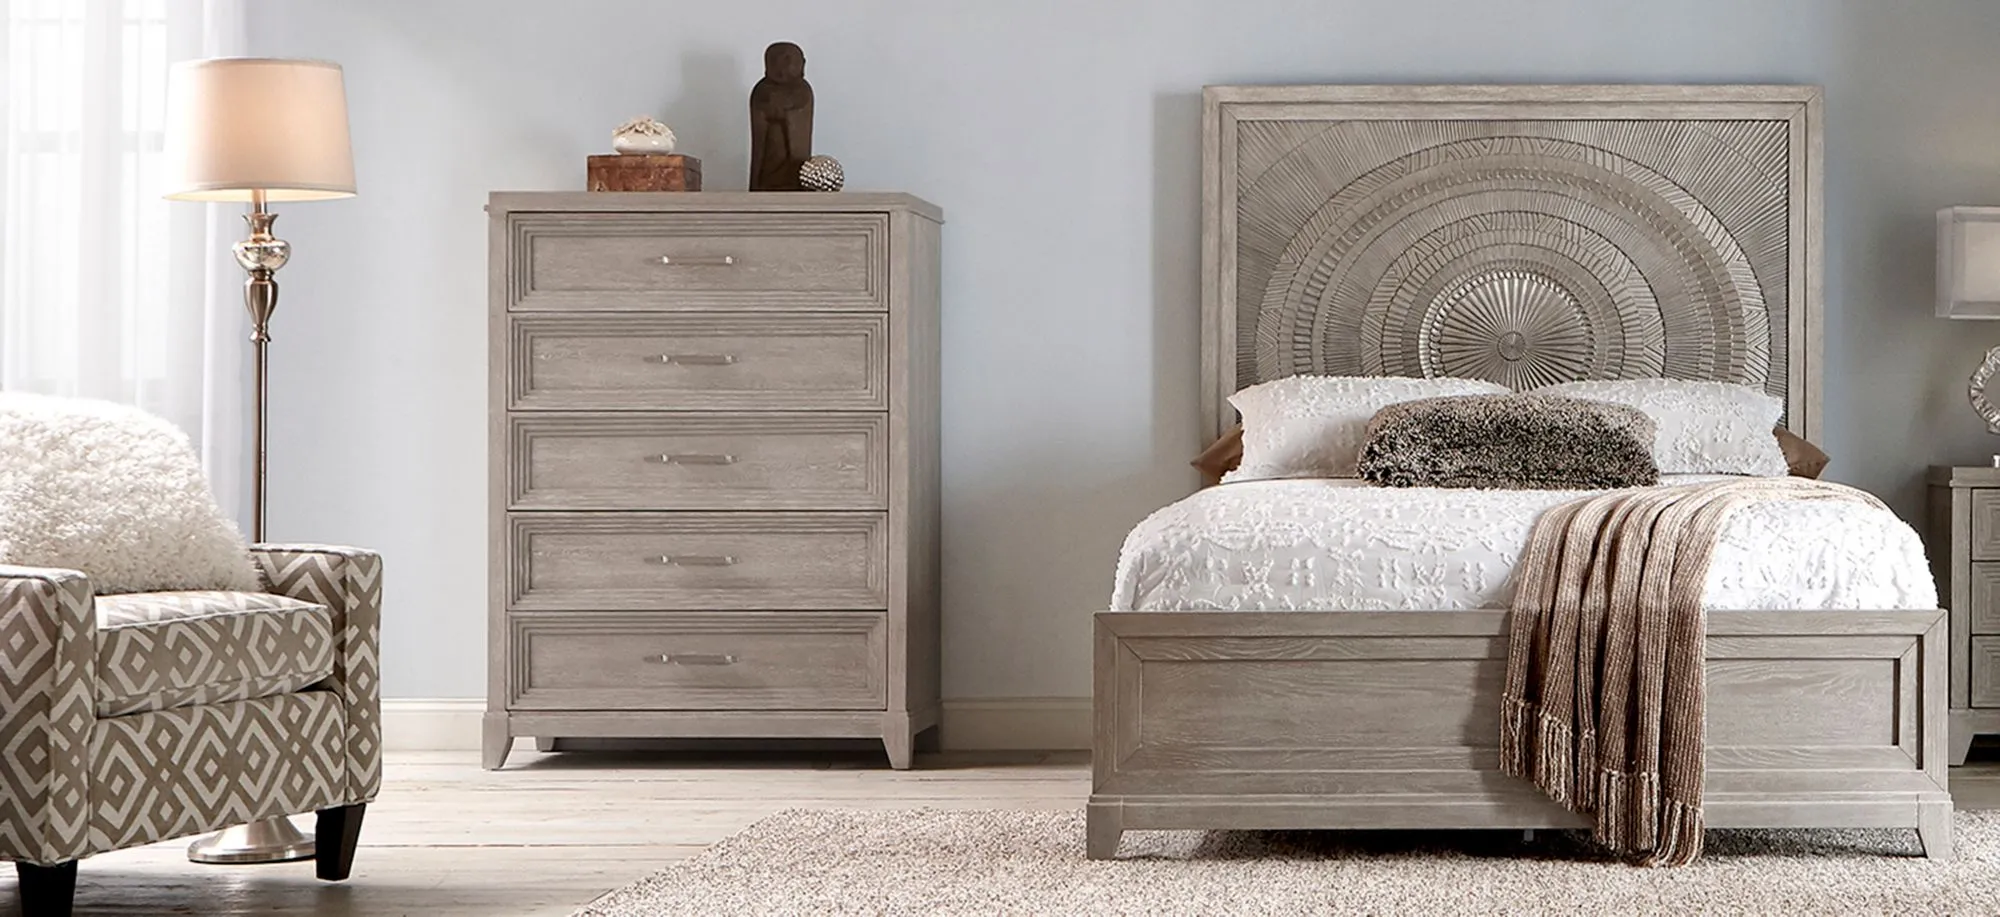 Liberty Furniture Montara Bedroom Chest in Washed Taupe Silver Champagne by Liberty Furniture